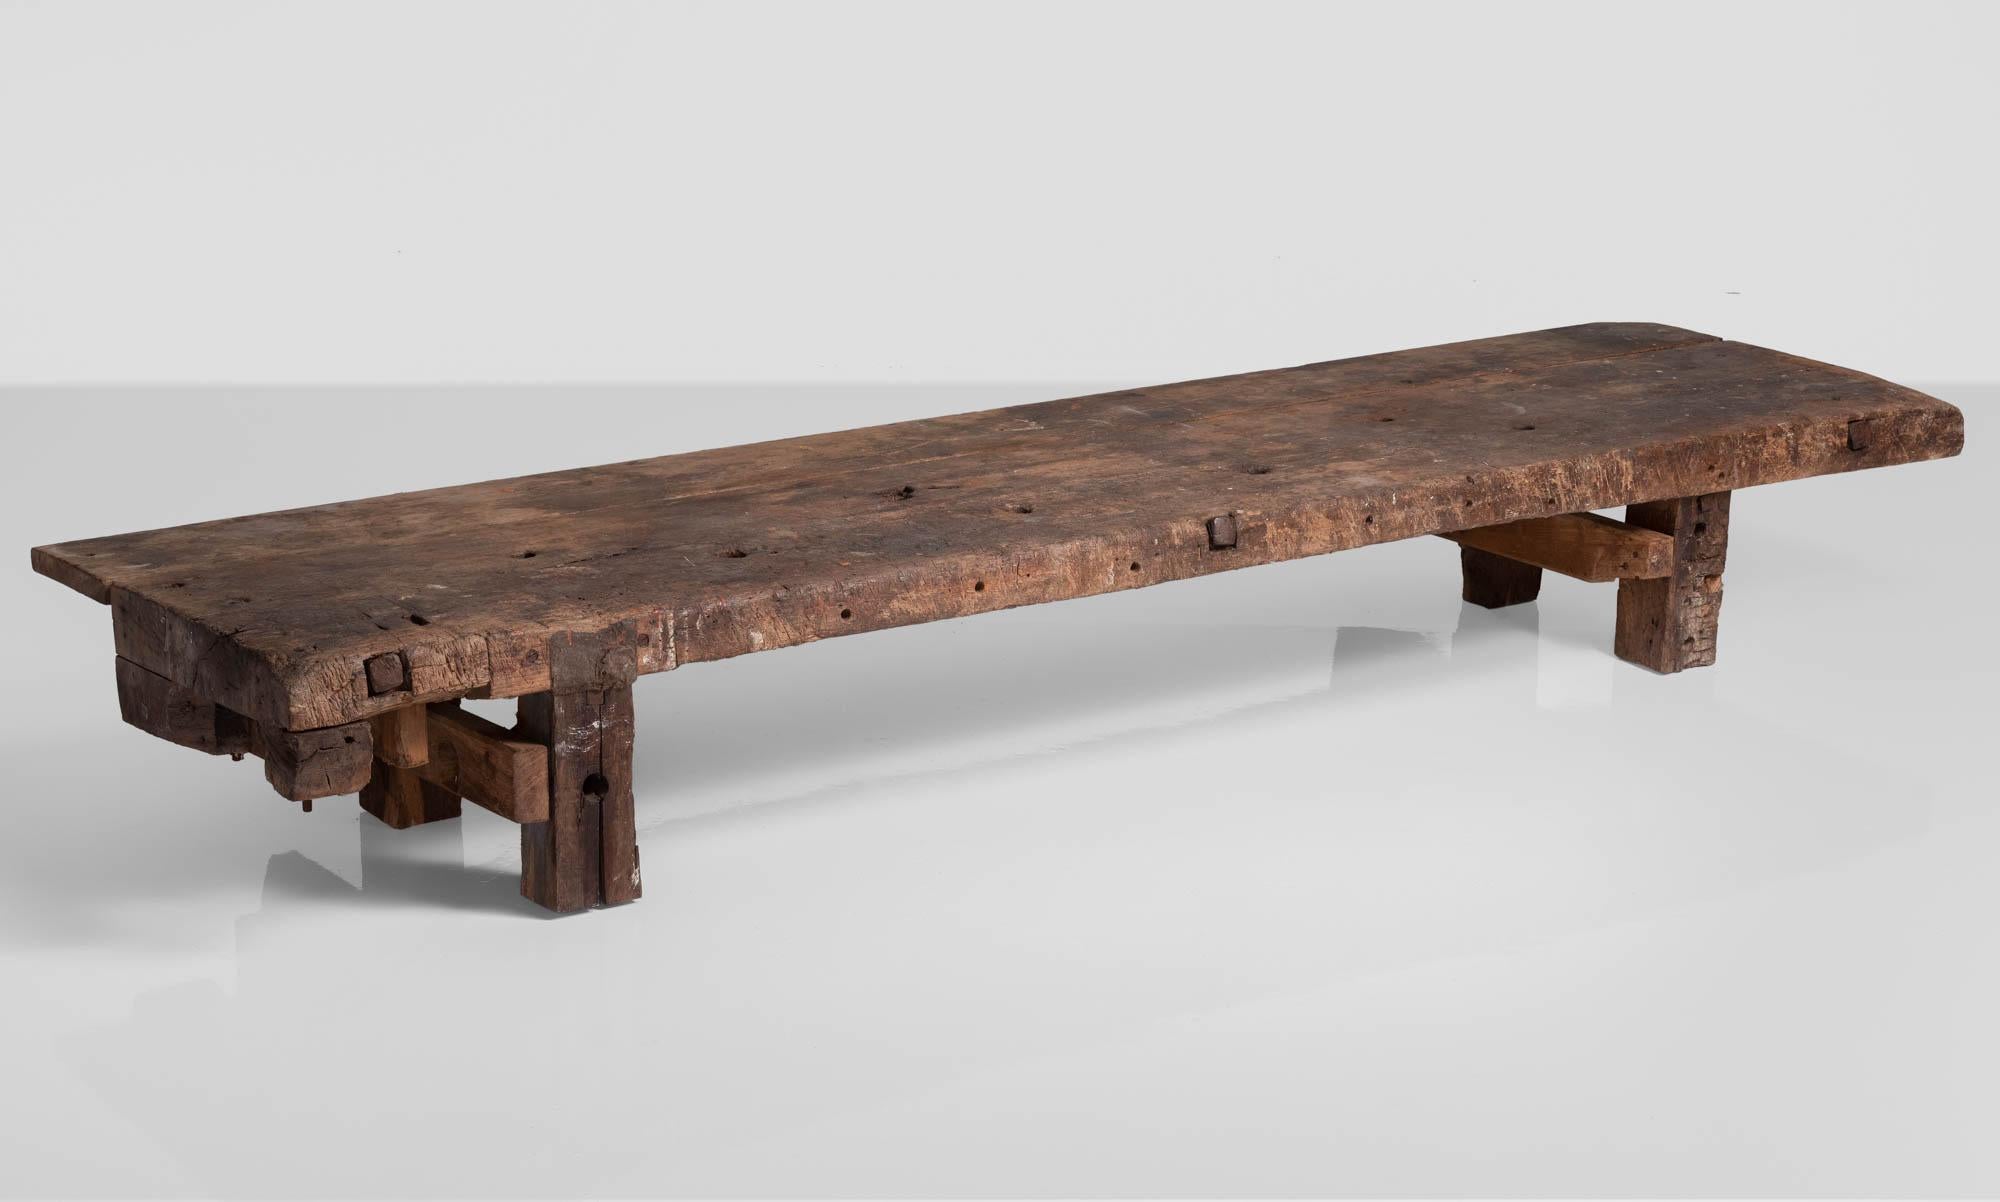 Primitive low table with hidden storage, France, circa 1880.

In an incredible size with one segment of the top, which opens to reveal storage.